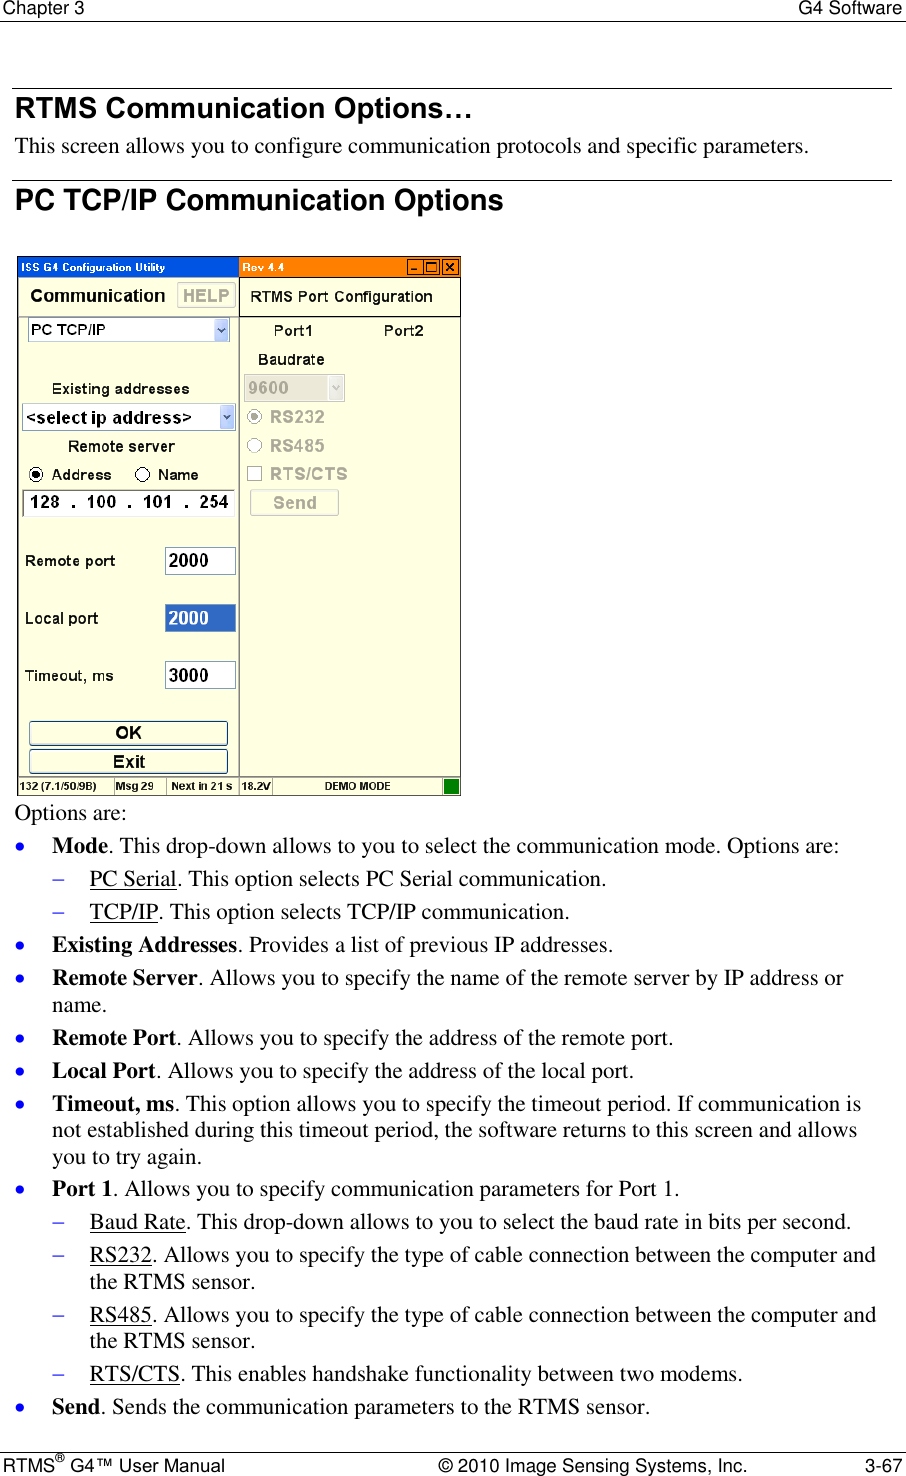 Chapter 3  G4 Software RTMS® G4™ User Manual  © 2010 Image Sensing Systems, Inc.  3-67 RTMS Communication Options… This screen allows you to configure communication protocols and specific parameters. PC TCP/IP Communication Options   Options are:  Mode. This drop-down allows to you to select the communication mode. Options are:   PC Serial. This option selects PC Serial communication.  TCP/IP. This option selects TCP/IP communication.  Existing Addresses. Provides a list of previous IP addresses.   Remote Server. Allows you to specify the name of the remote server by IP address or name.  Remote Port. Allows you to specify the address of the remote port.  Local Port. Allows you to specify the address of the local port.  Timeout, ms. This option allows you to specify the timeout period. If communication is not established during this timeout period, the software returns to this screen and allows you to try again.  Port 1. Allows you to specify communication parameters for Port 1.   Baud Rate. This drop-down allows to you to select the baud rate in bits per second.  RS232. Allows you to specify the type of cable connection between the computer and the RTMS sensor.  RS485. Allows you to specify the type of cable connection between the computer and the RTMS sensor.  RTS/CTS. This enables handshake functionality between two modems.   Send. Sends the communication parameters to the RTMS sensor. 